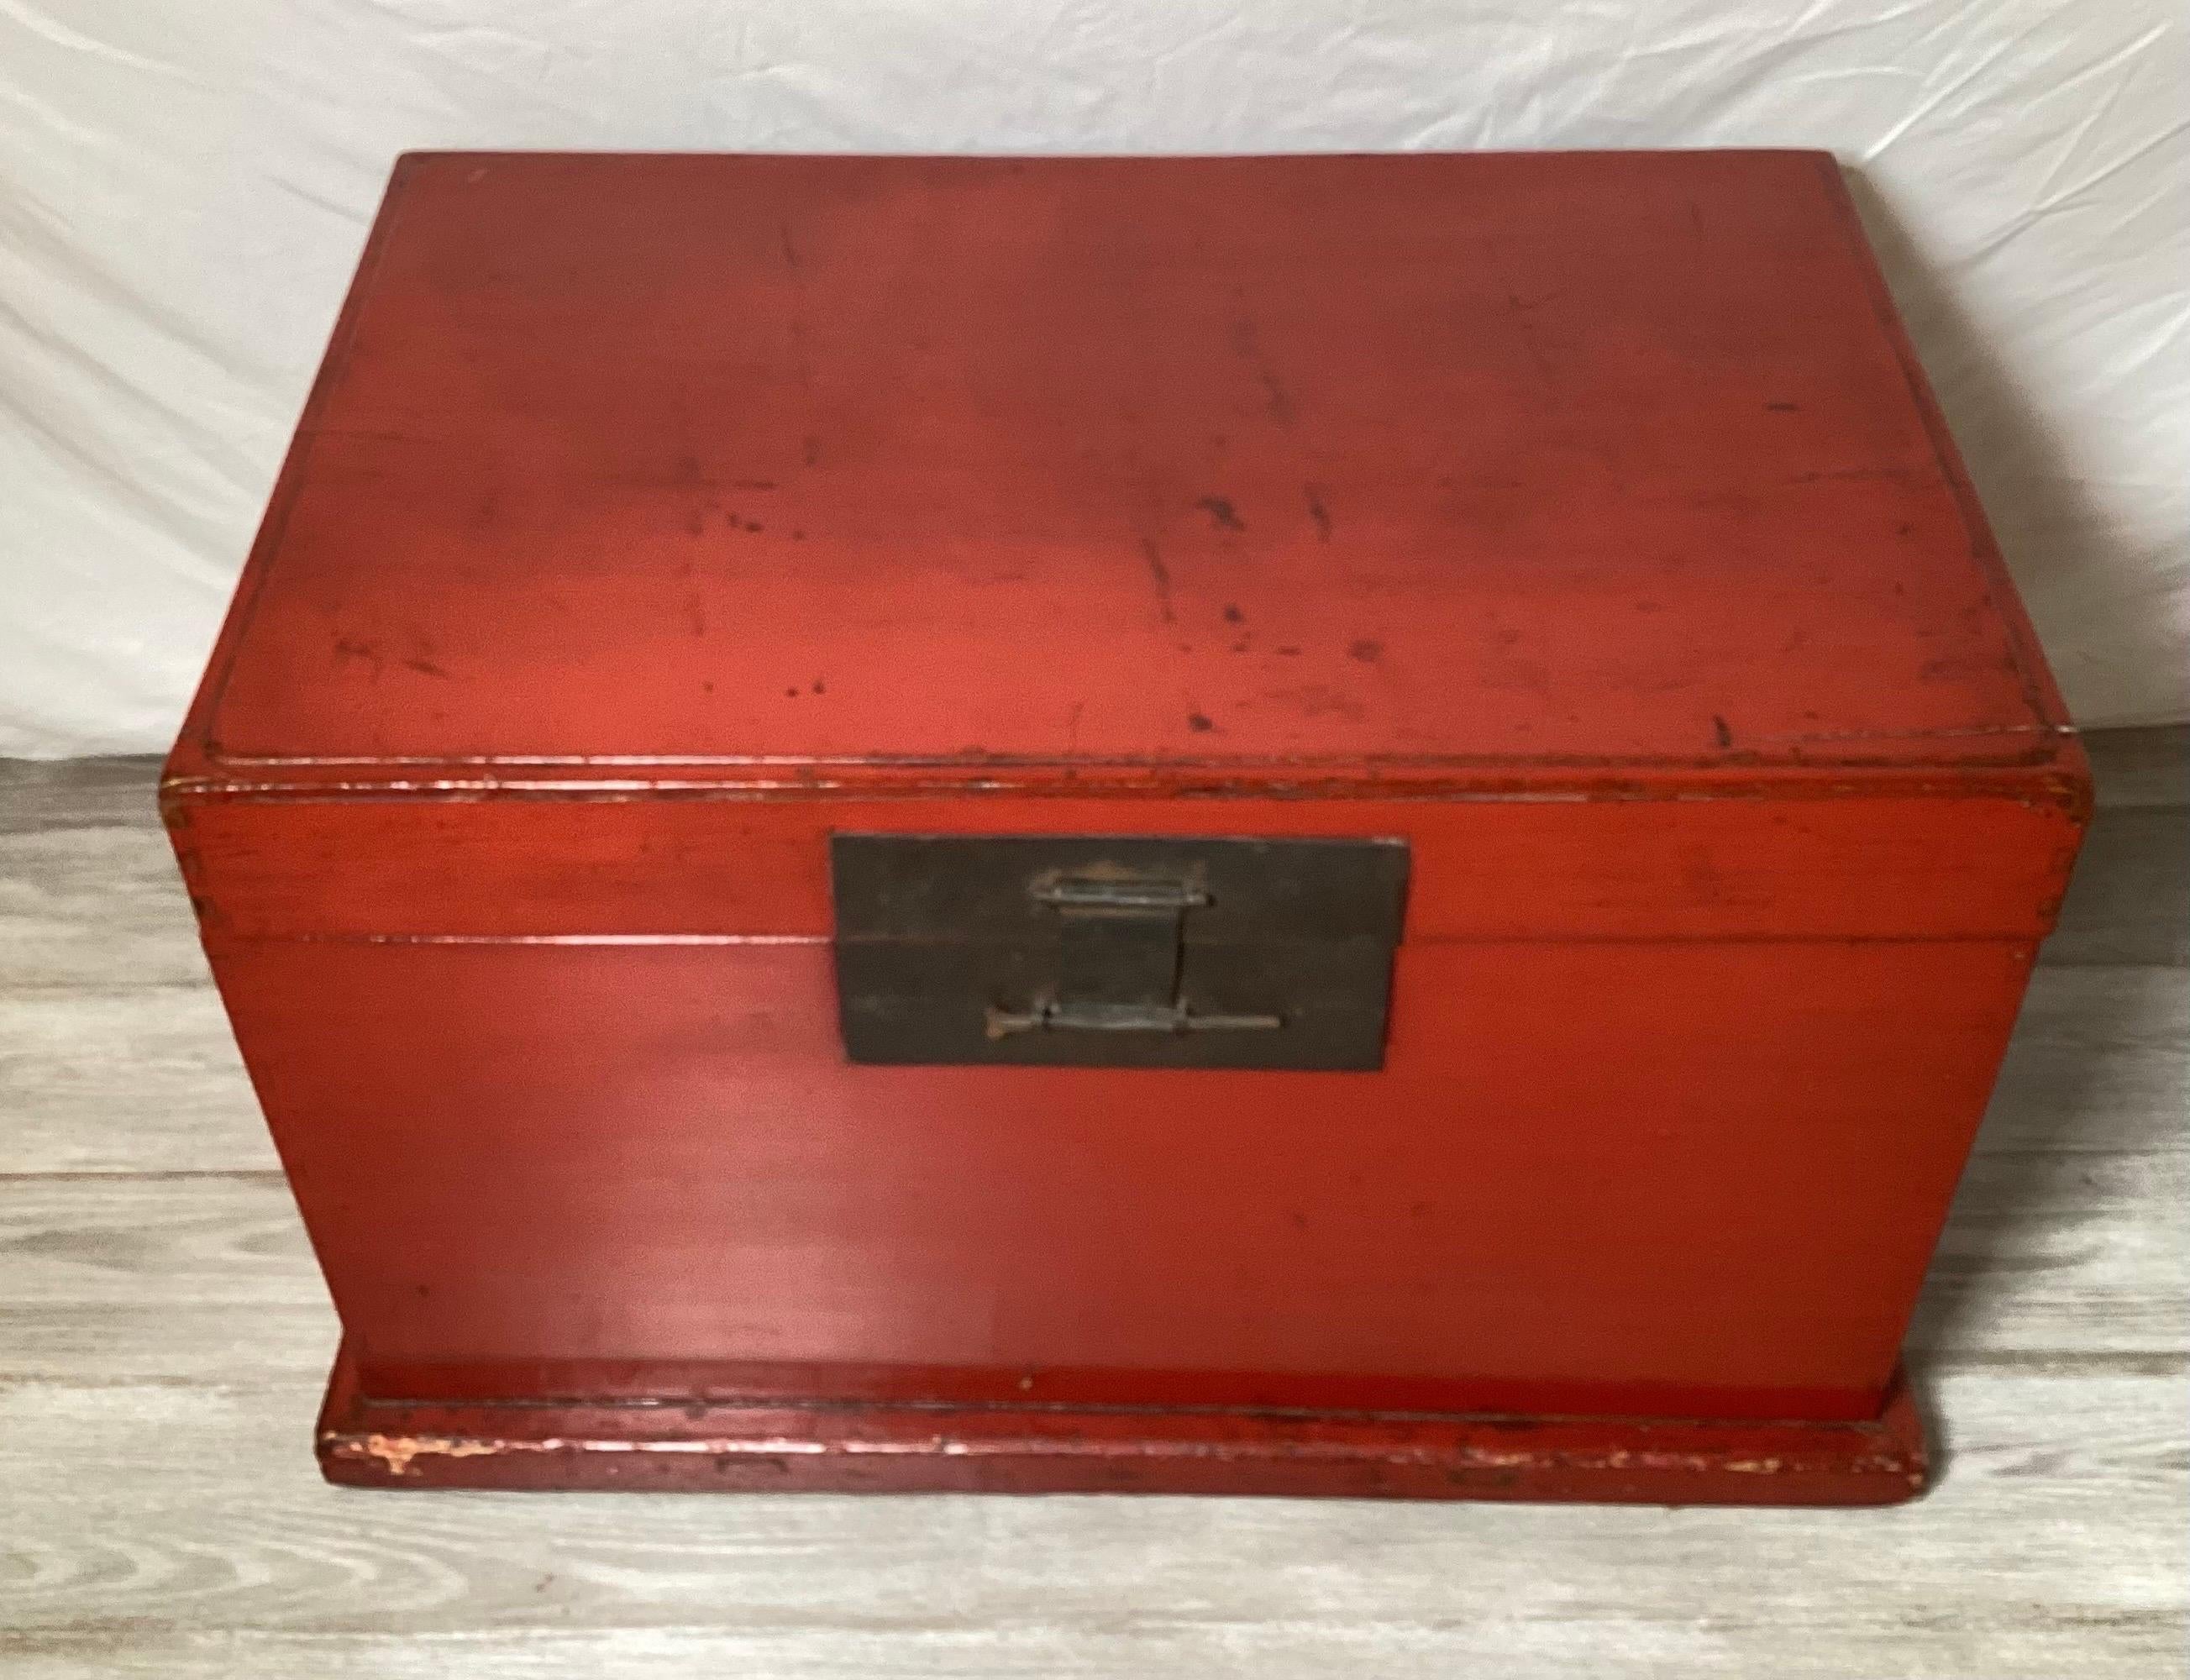 An Antique 1880's Chinese red lacquer trunk with brass mounts.  The original lacquer finish with signs of age and use.  Great original condition, the inside bottom with an age separation, still functional and decorative 